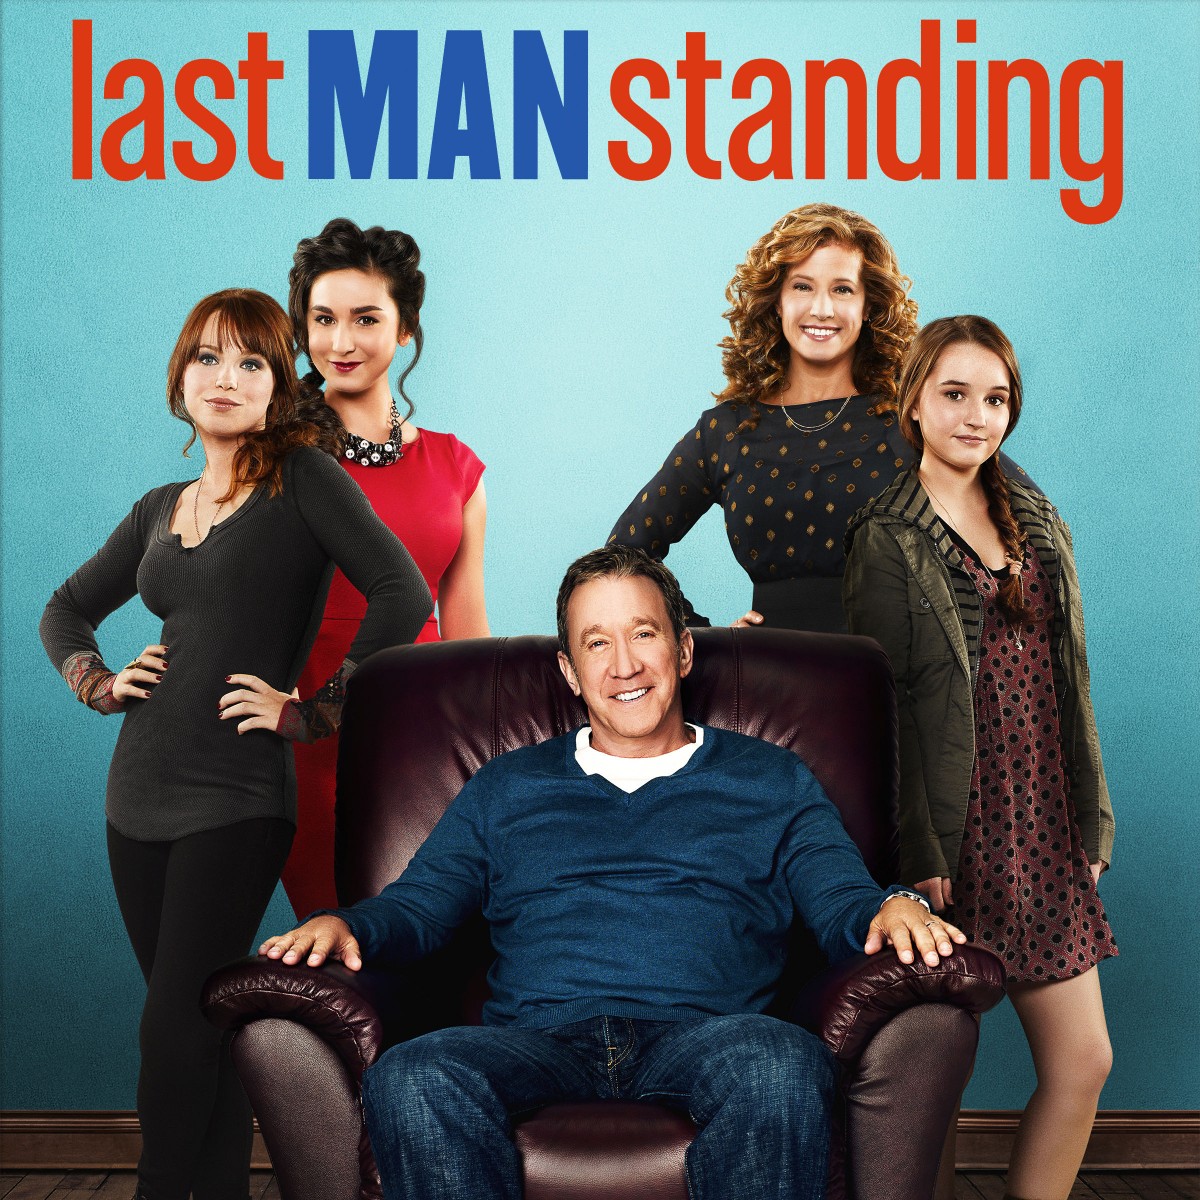 Images of Last Man Standing | 1200x1200